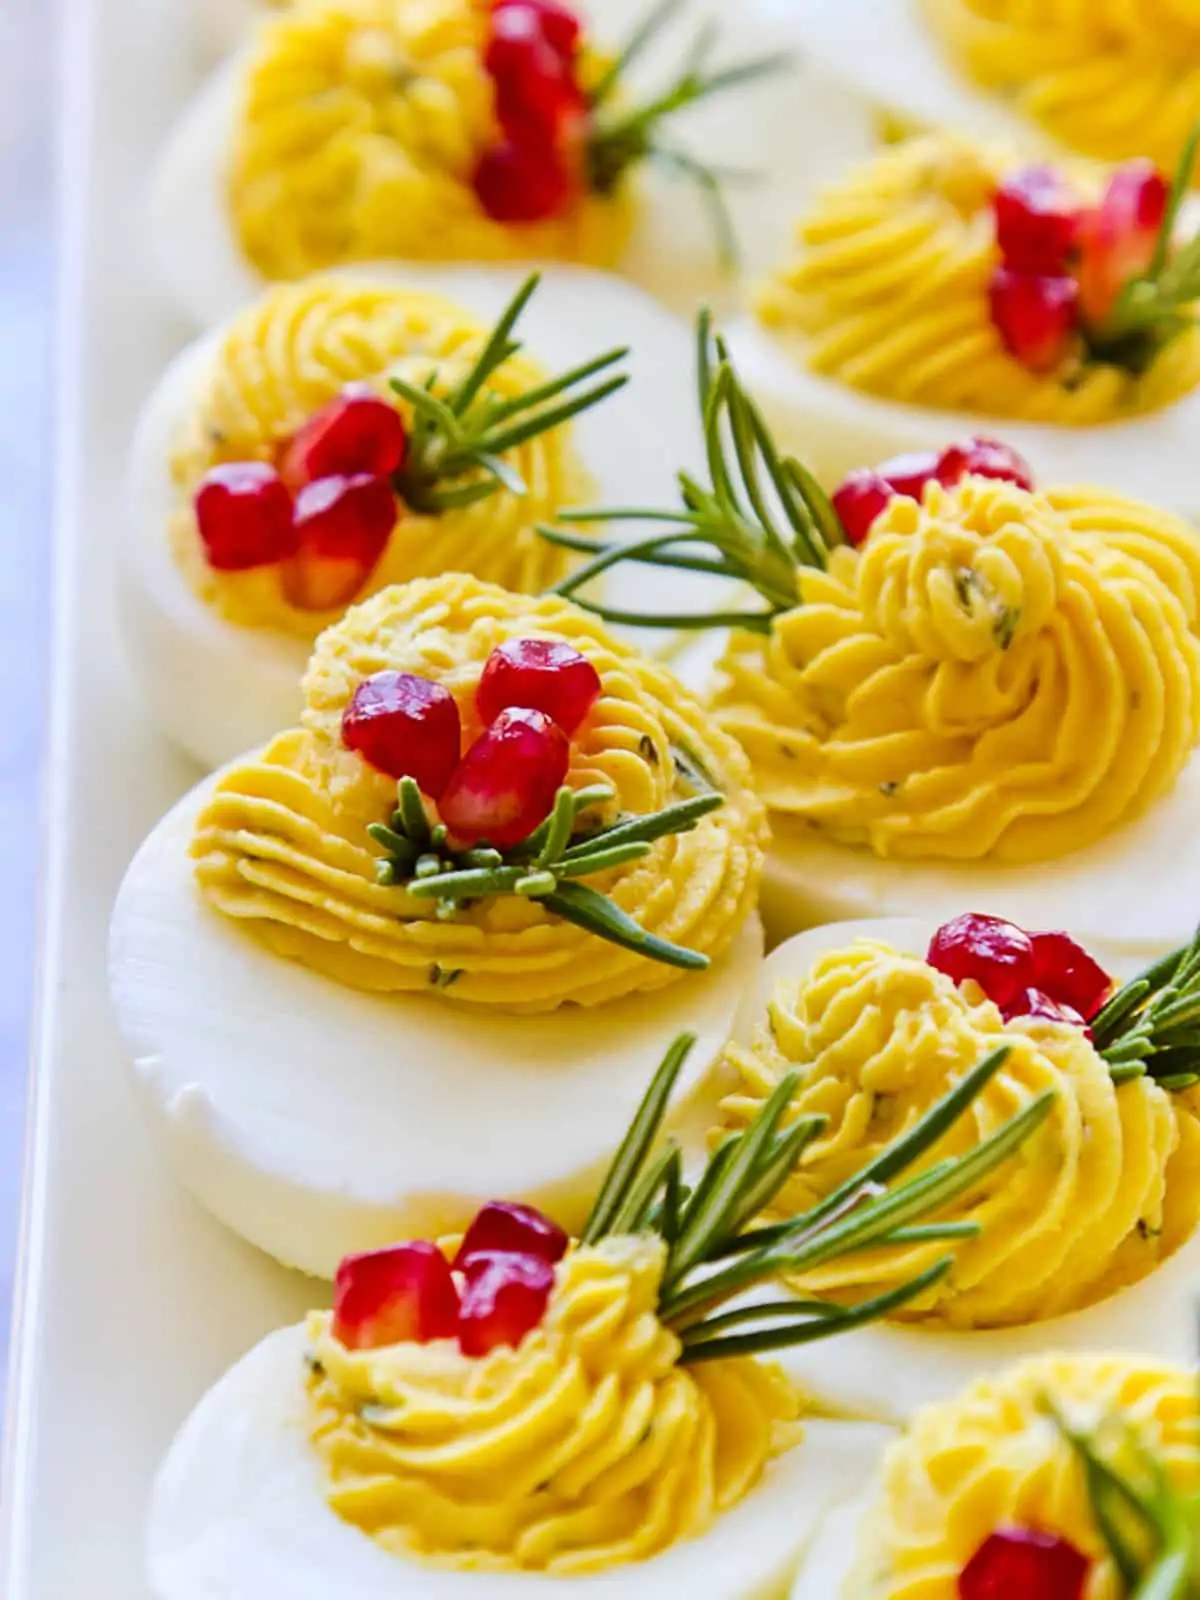 A platter of holiday Christmas deviled eggs garnished with rosemary and pomegranate seeds.